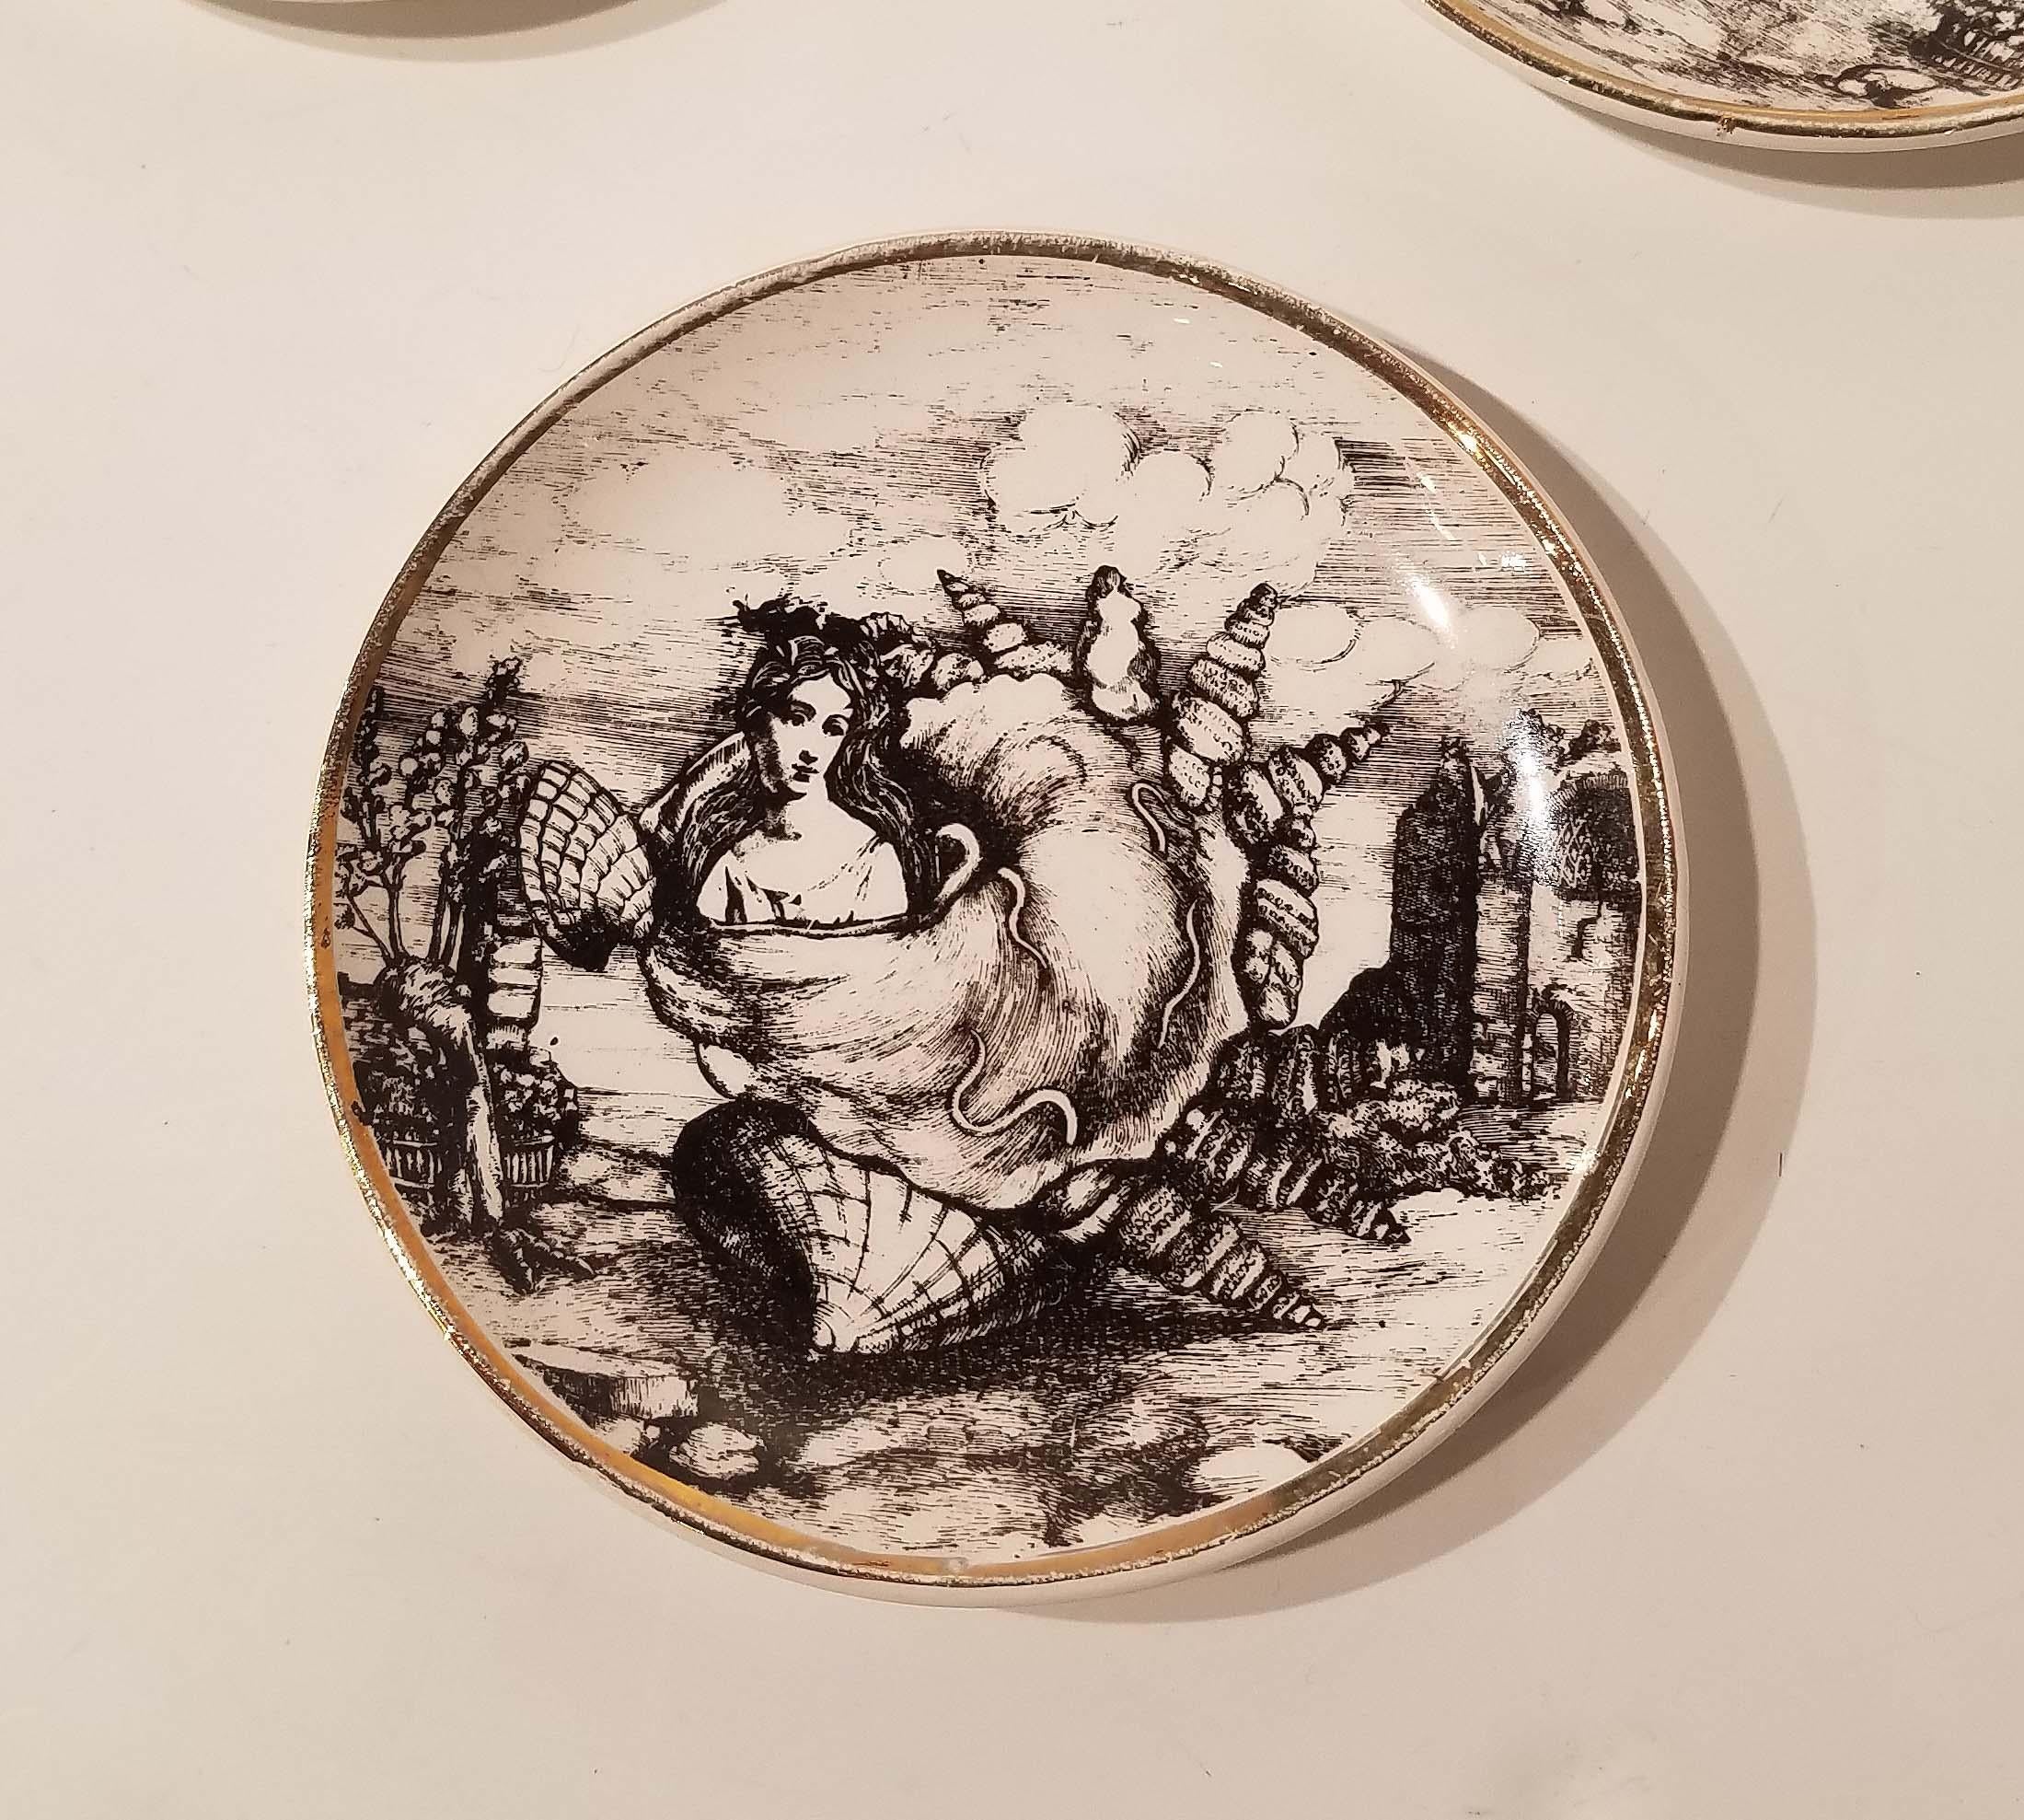 Piero Fornasetti (1913-1988)
A Set of Six 'Conchyliorum' Coasters, 1950s
lithograpically-decorated and gilt porcelain, with original box
each 4 in. (10 cm.) diameter
each marked FORNASETTI MILANO MADE IN ITALY FOR ROSENFELD IMPORTS.
 